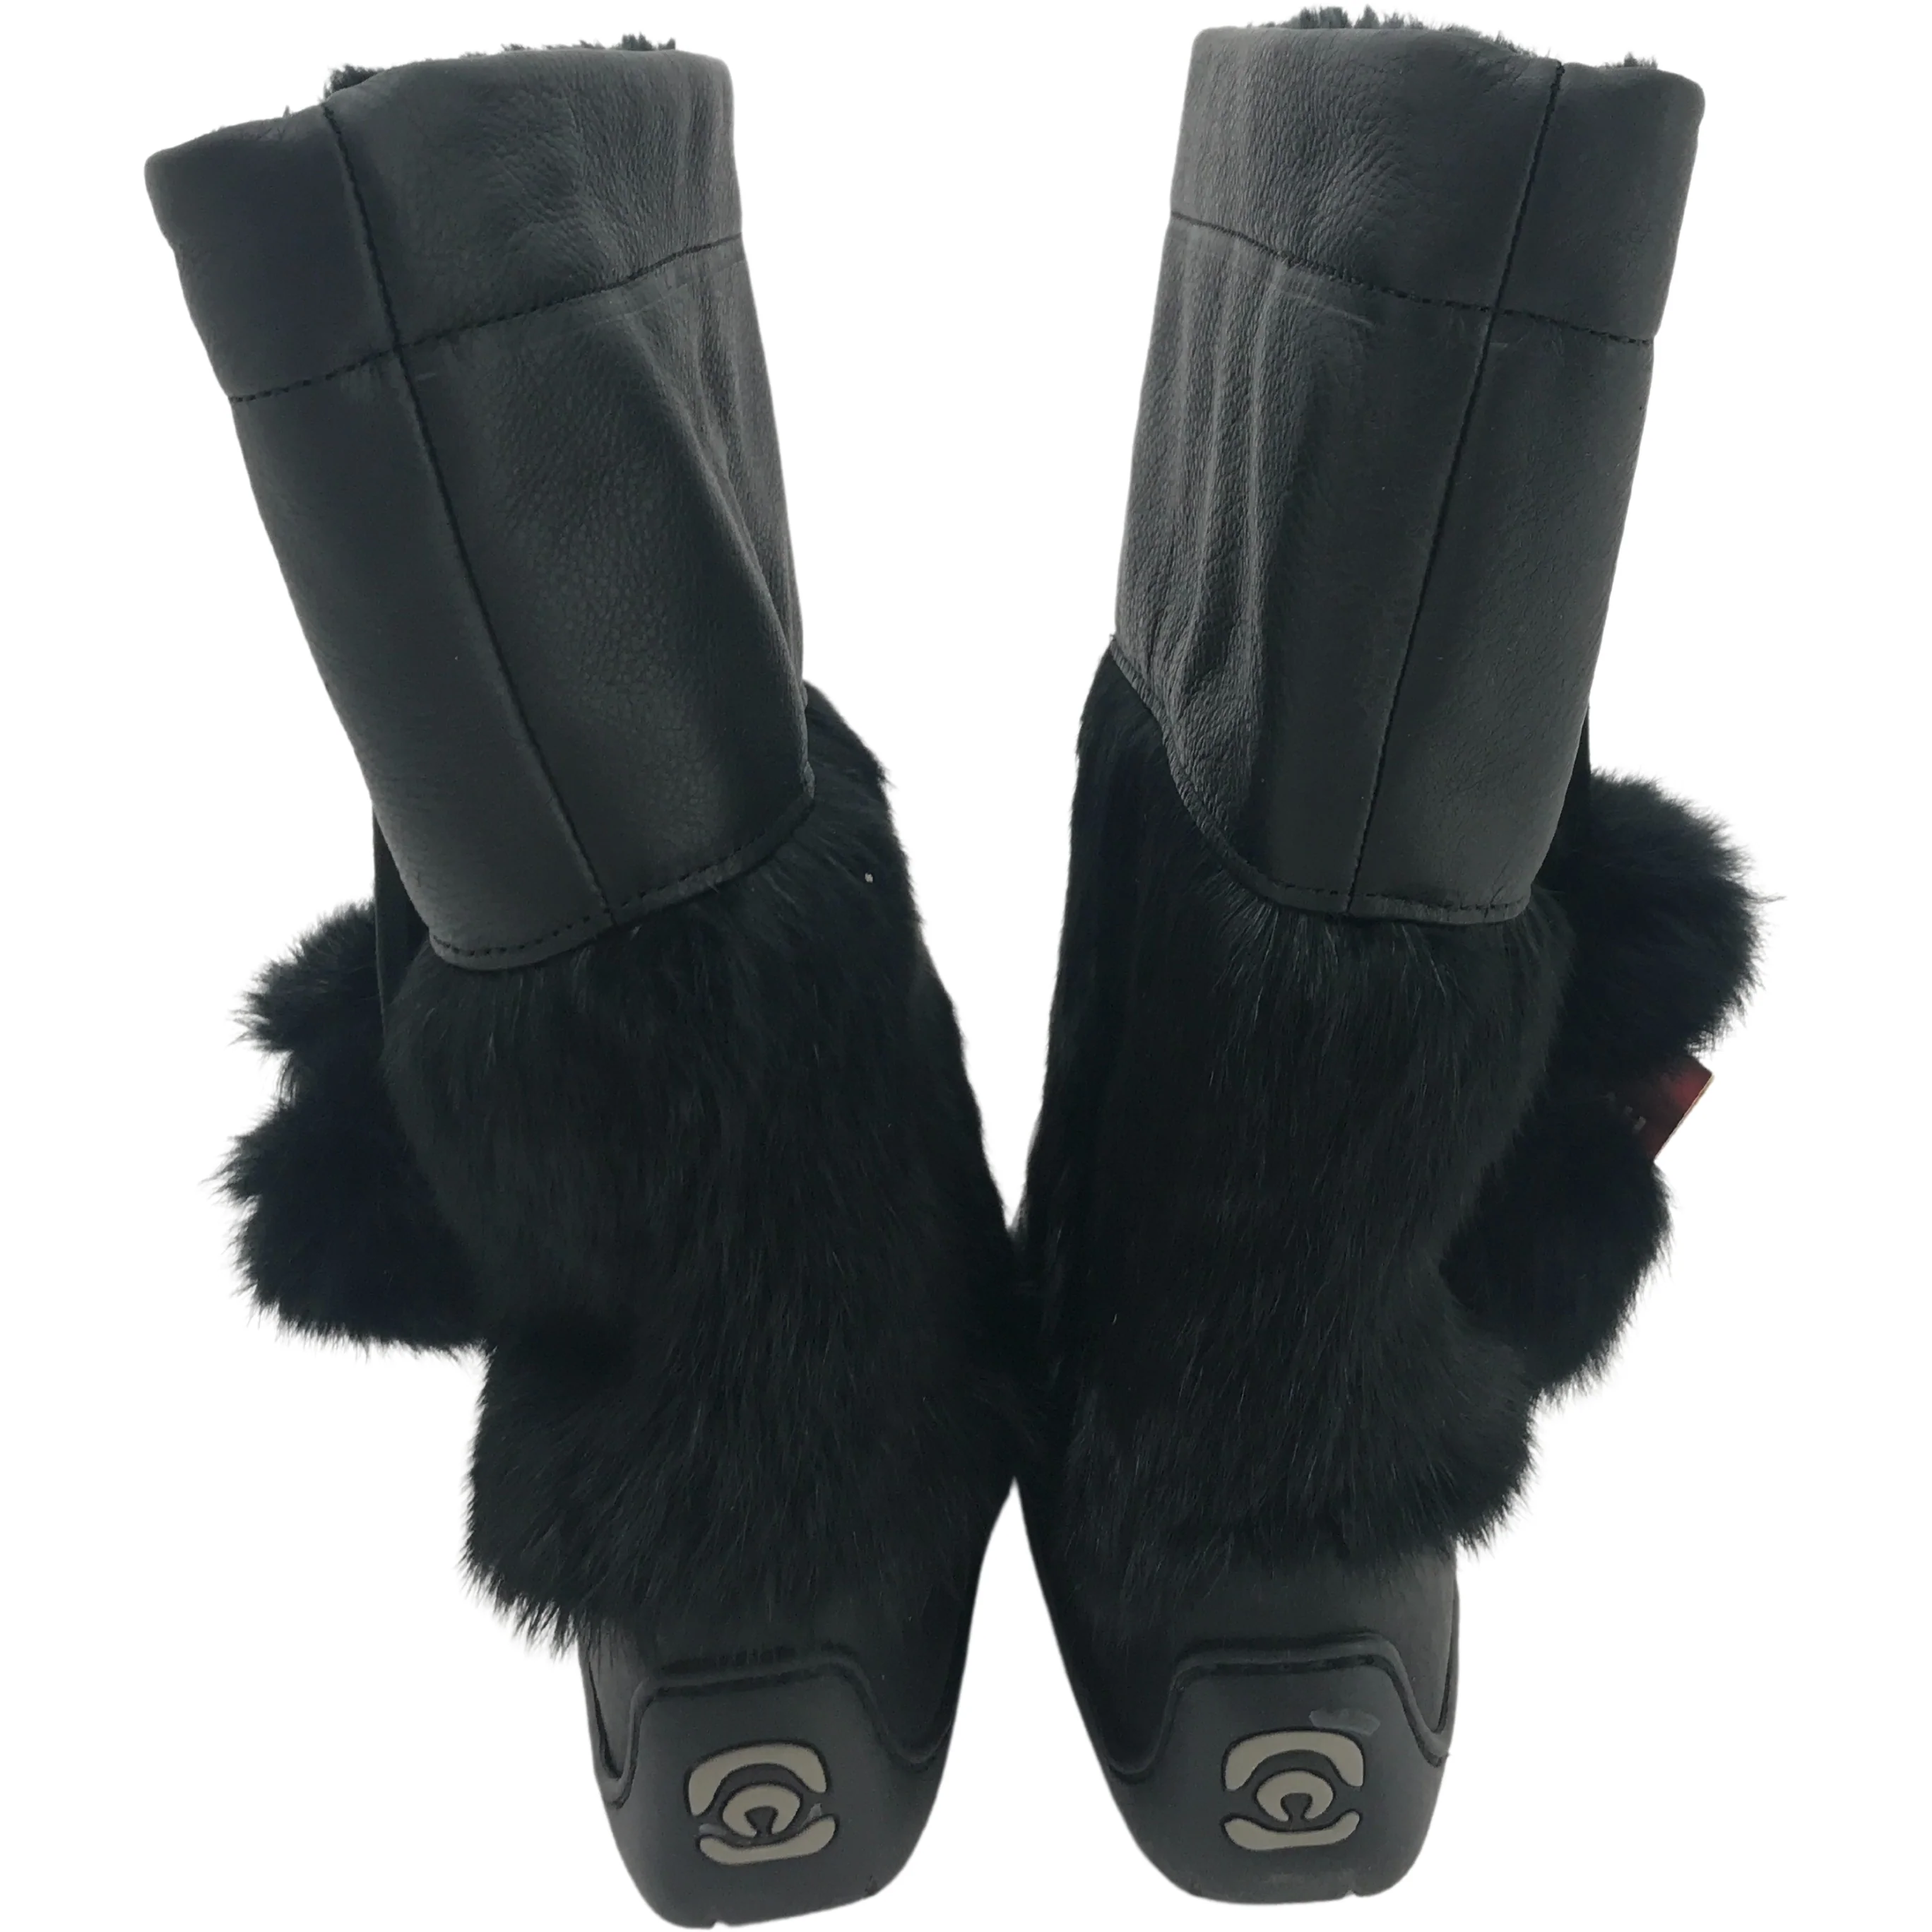 Manitobah Mukluks Women's Winter Boots / Tall Boots / Black / Fur / Size 10